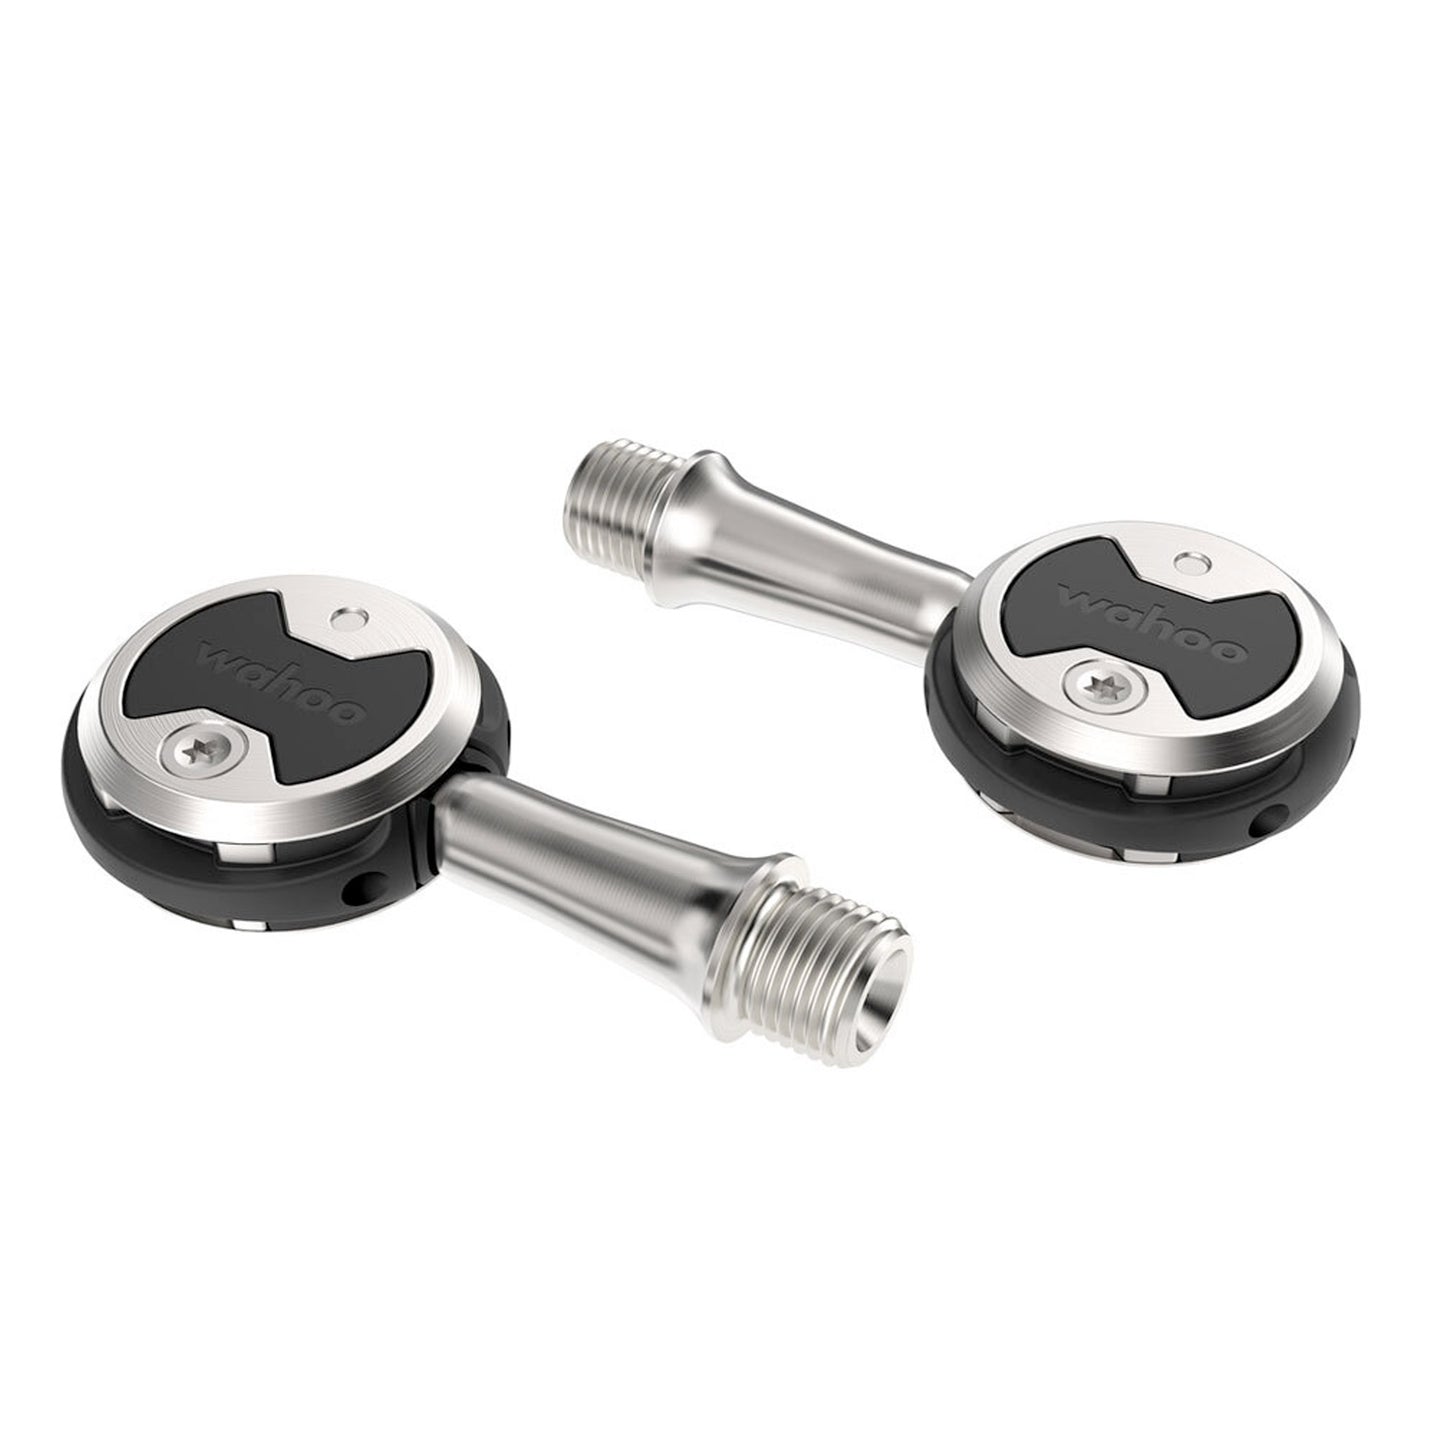 Wahoo Speedplay Zero Stainless Road Pedals Including Cleats buy now from Woolys Wheels Sydney with free delivery